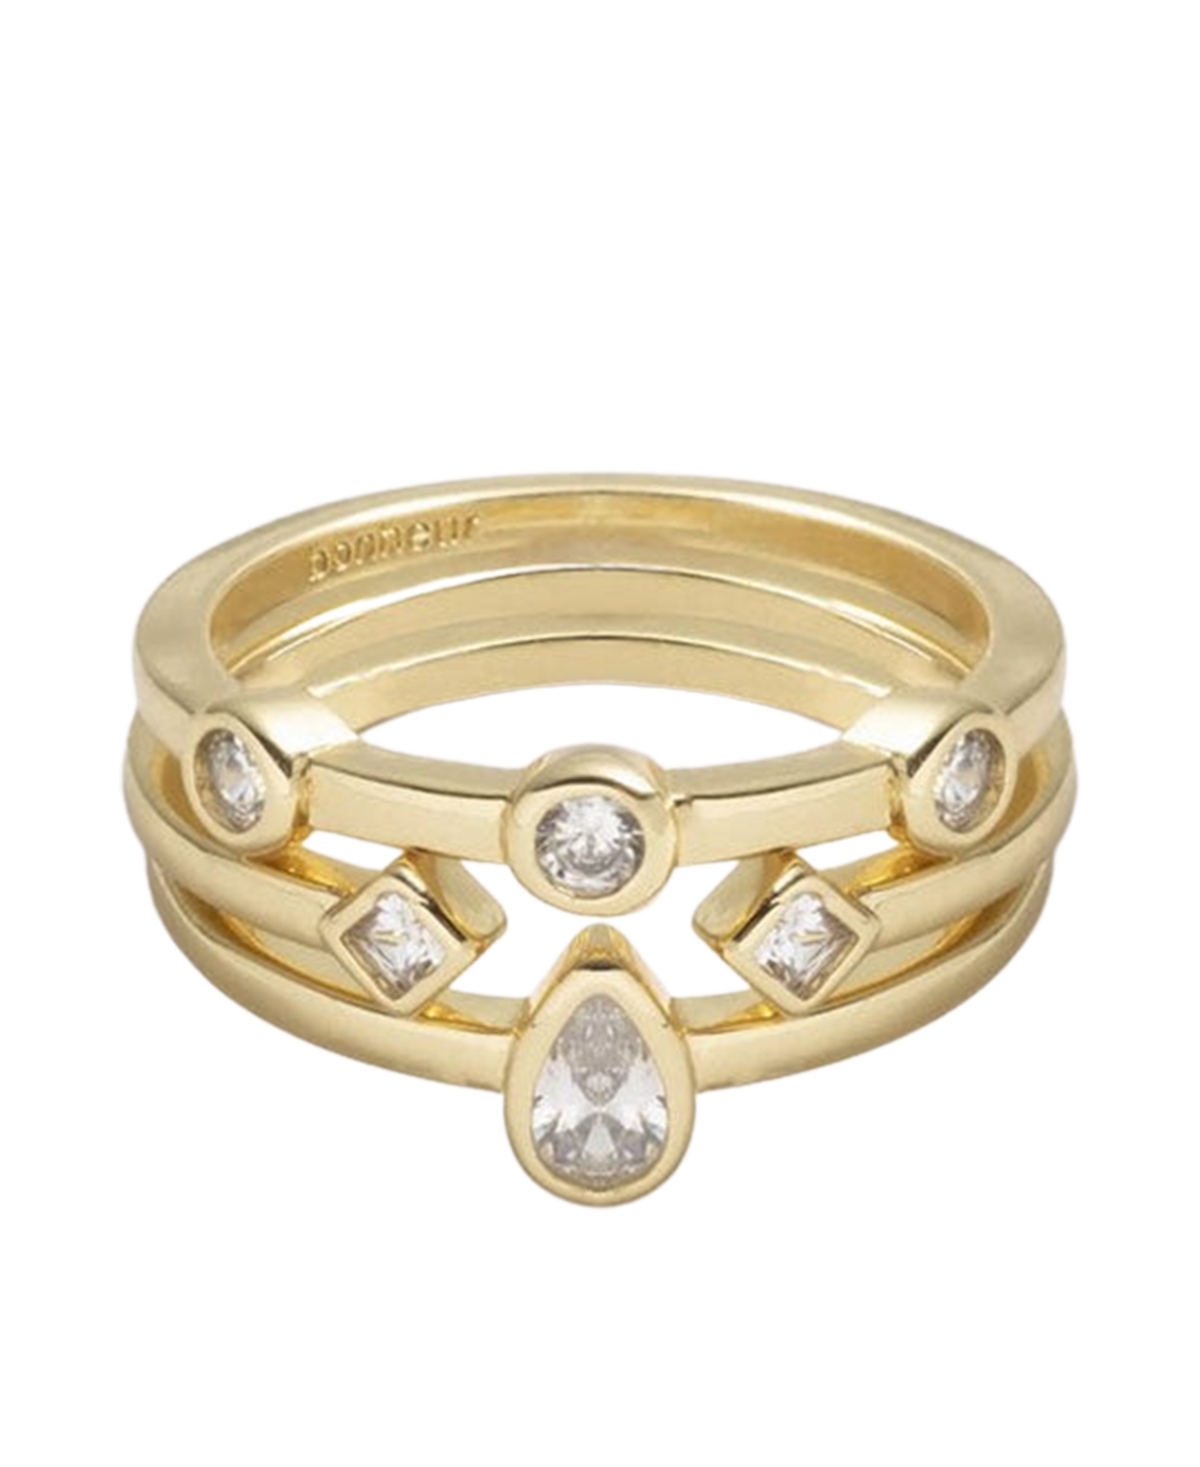 Bonheur Jewelry Louise Piece Stackable Ring Set In Karat Micro Plated Gold Over Brass